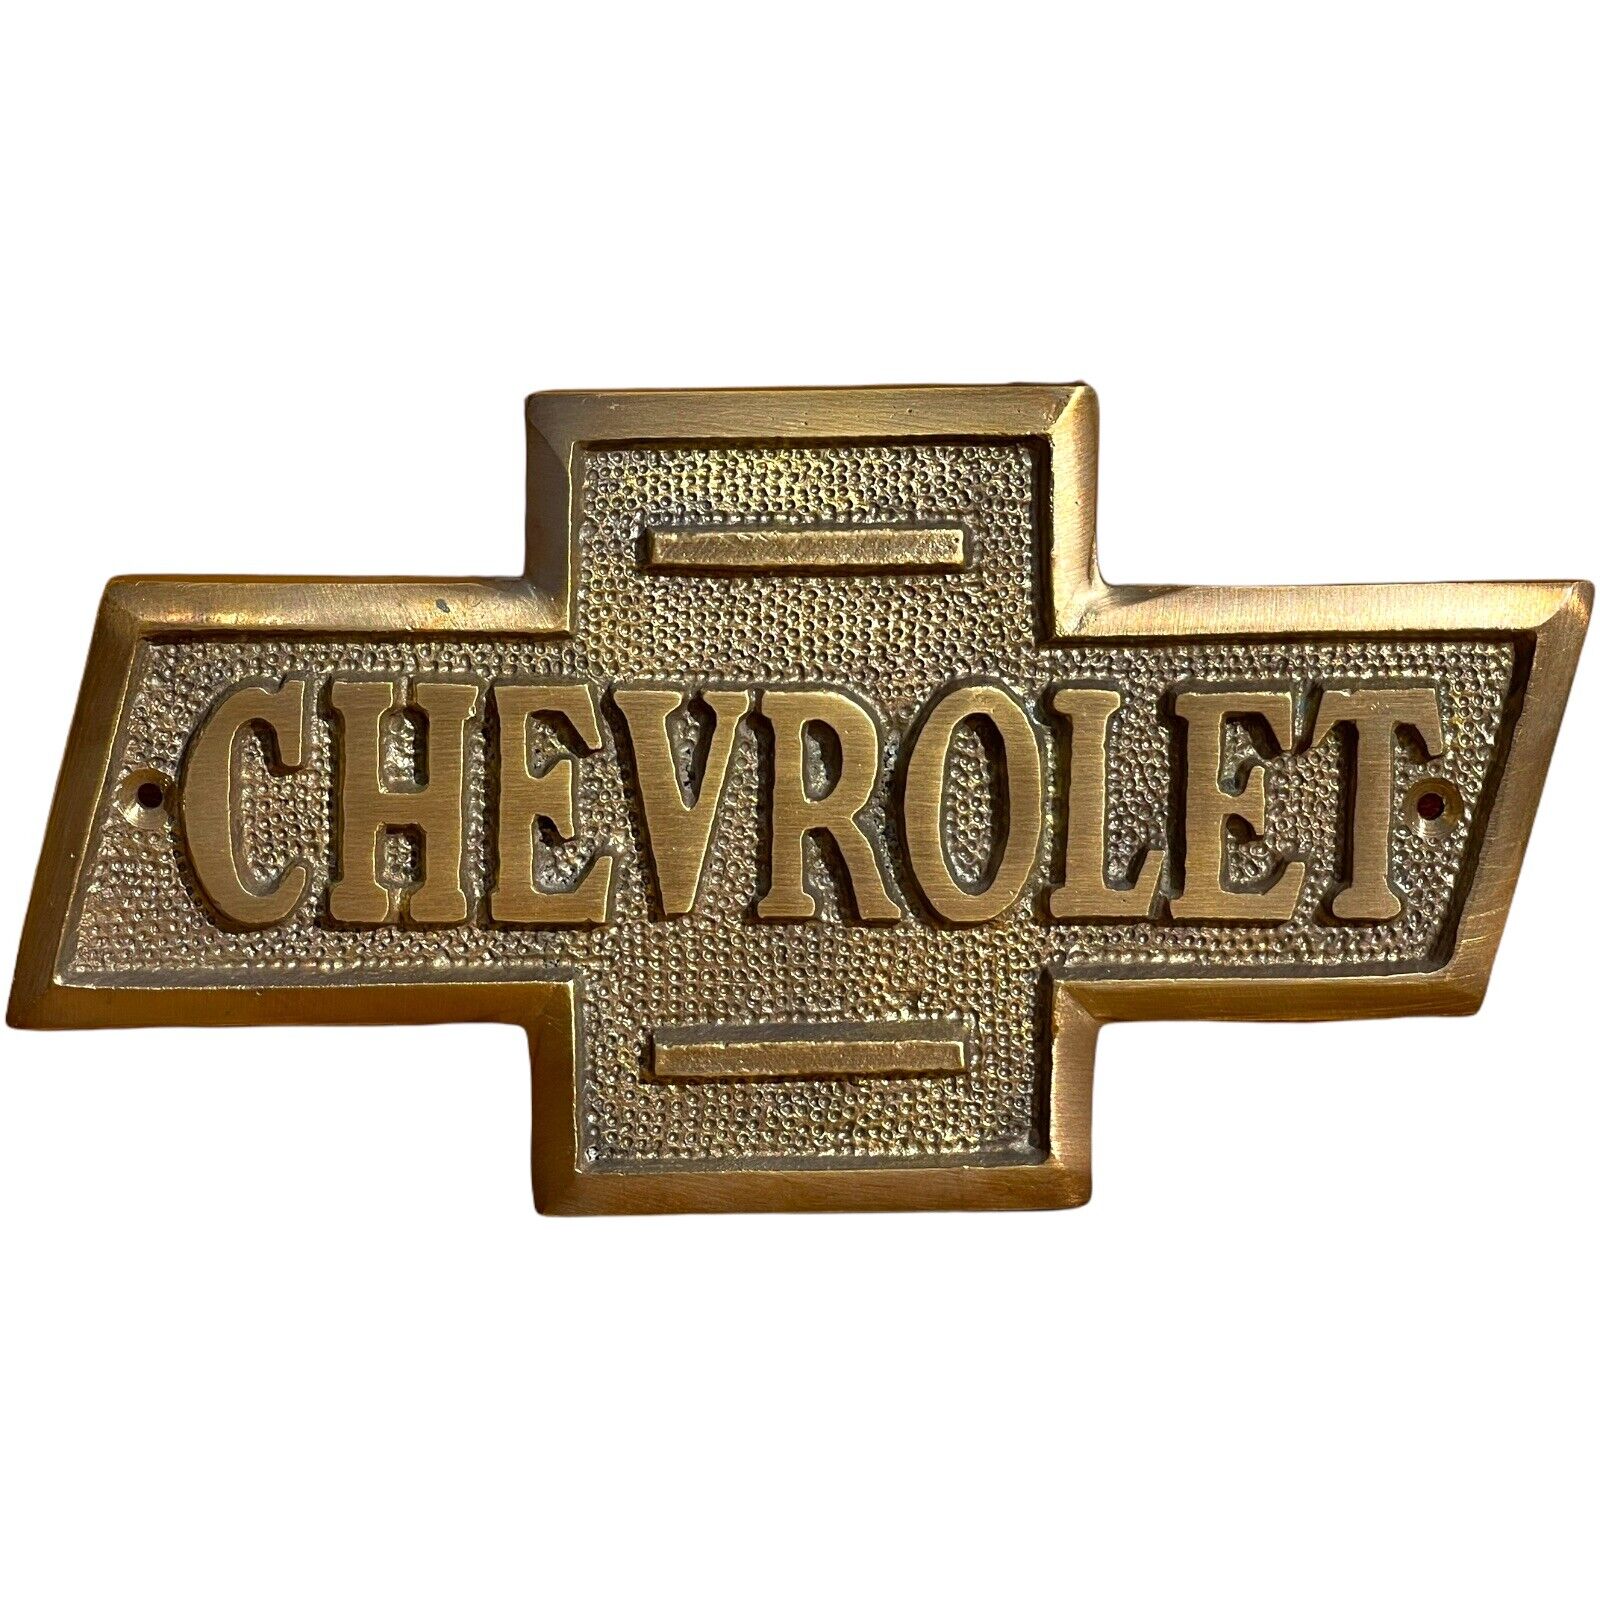 Chevrolet Auto Solid Brass Plaque Embossed Sign Tag W/ Antique Vintage Finish